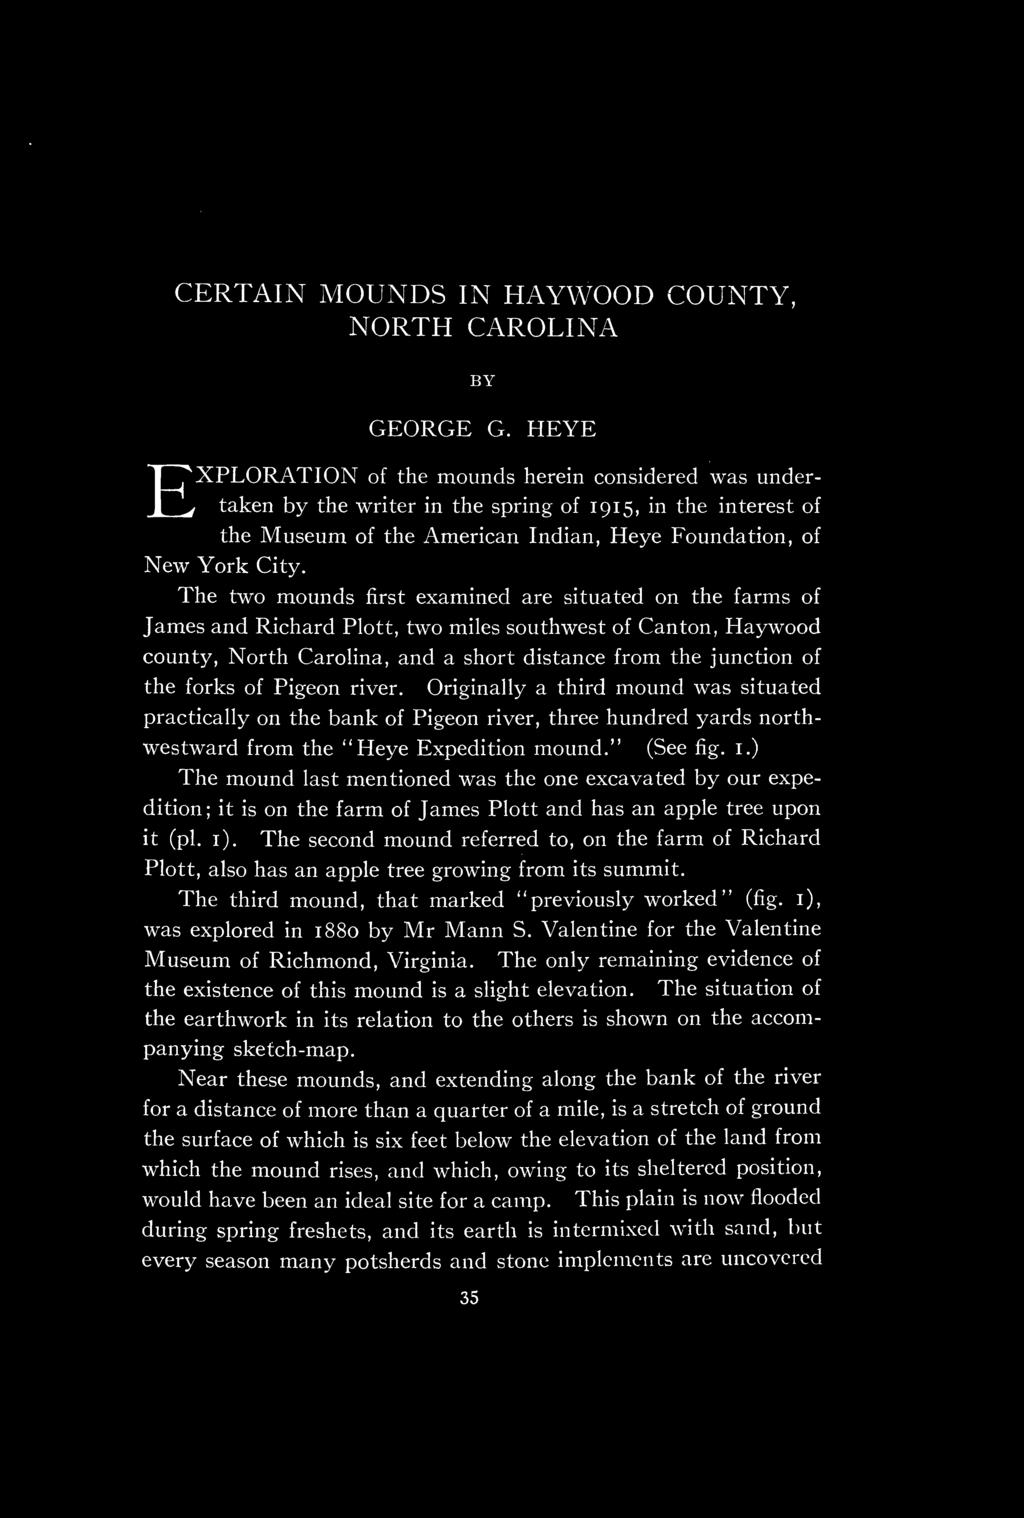 CERTAIN MOUNDS IN HAYWOOD COUNTY, NORTH CAROLINA BY GEORGE G.